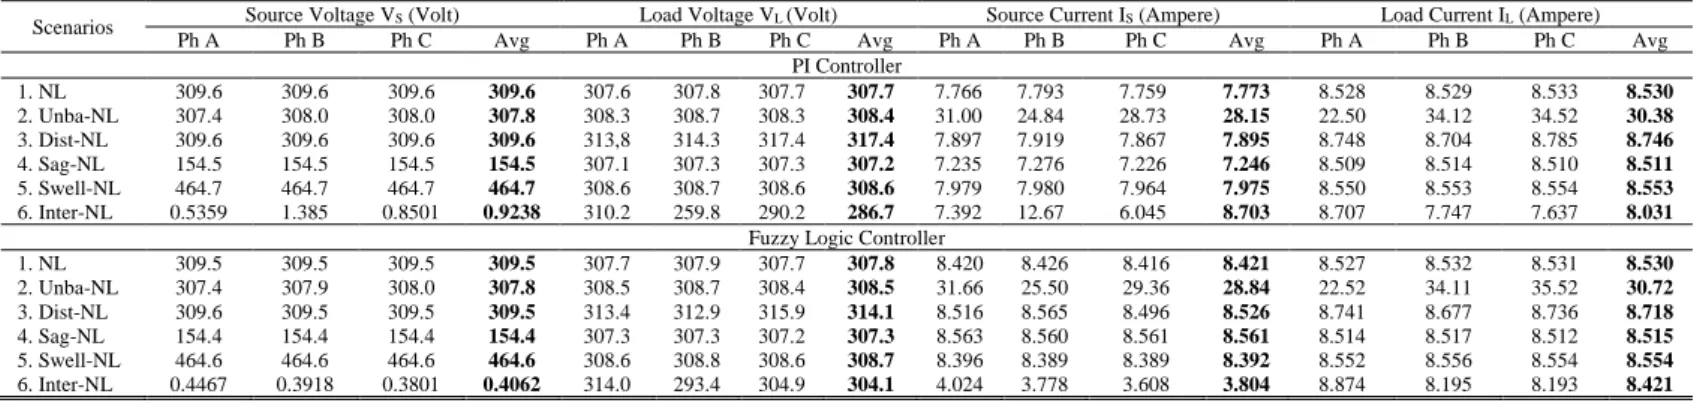 Table  III  shows  that  UPQC  supplied  by  PV  without  BES  in  3P3W  system  with  PI  and  FLC  control  for  interference  scenarios  1  to  5  is  able  to  result  stable  average  load  voltages  above  310  volt